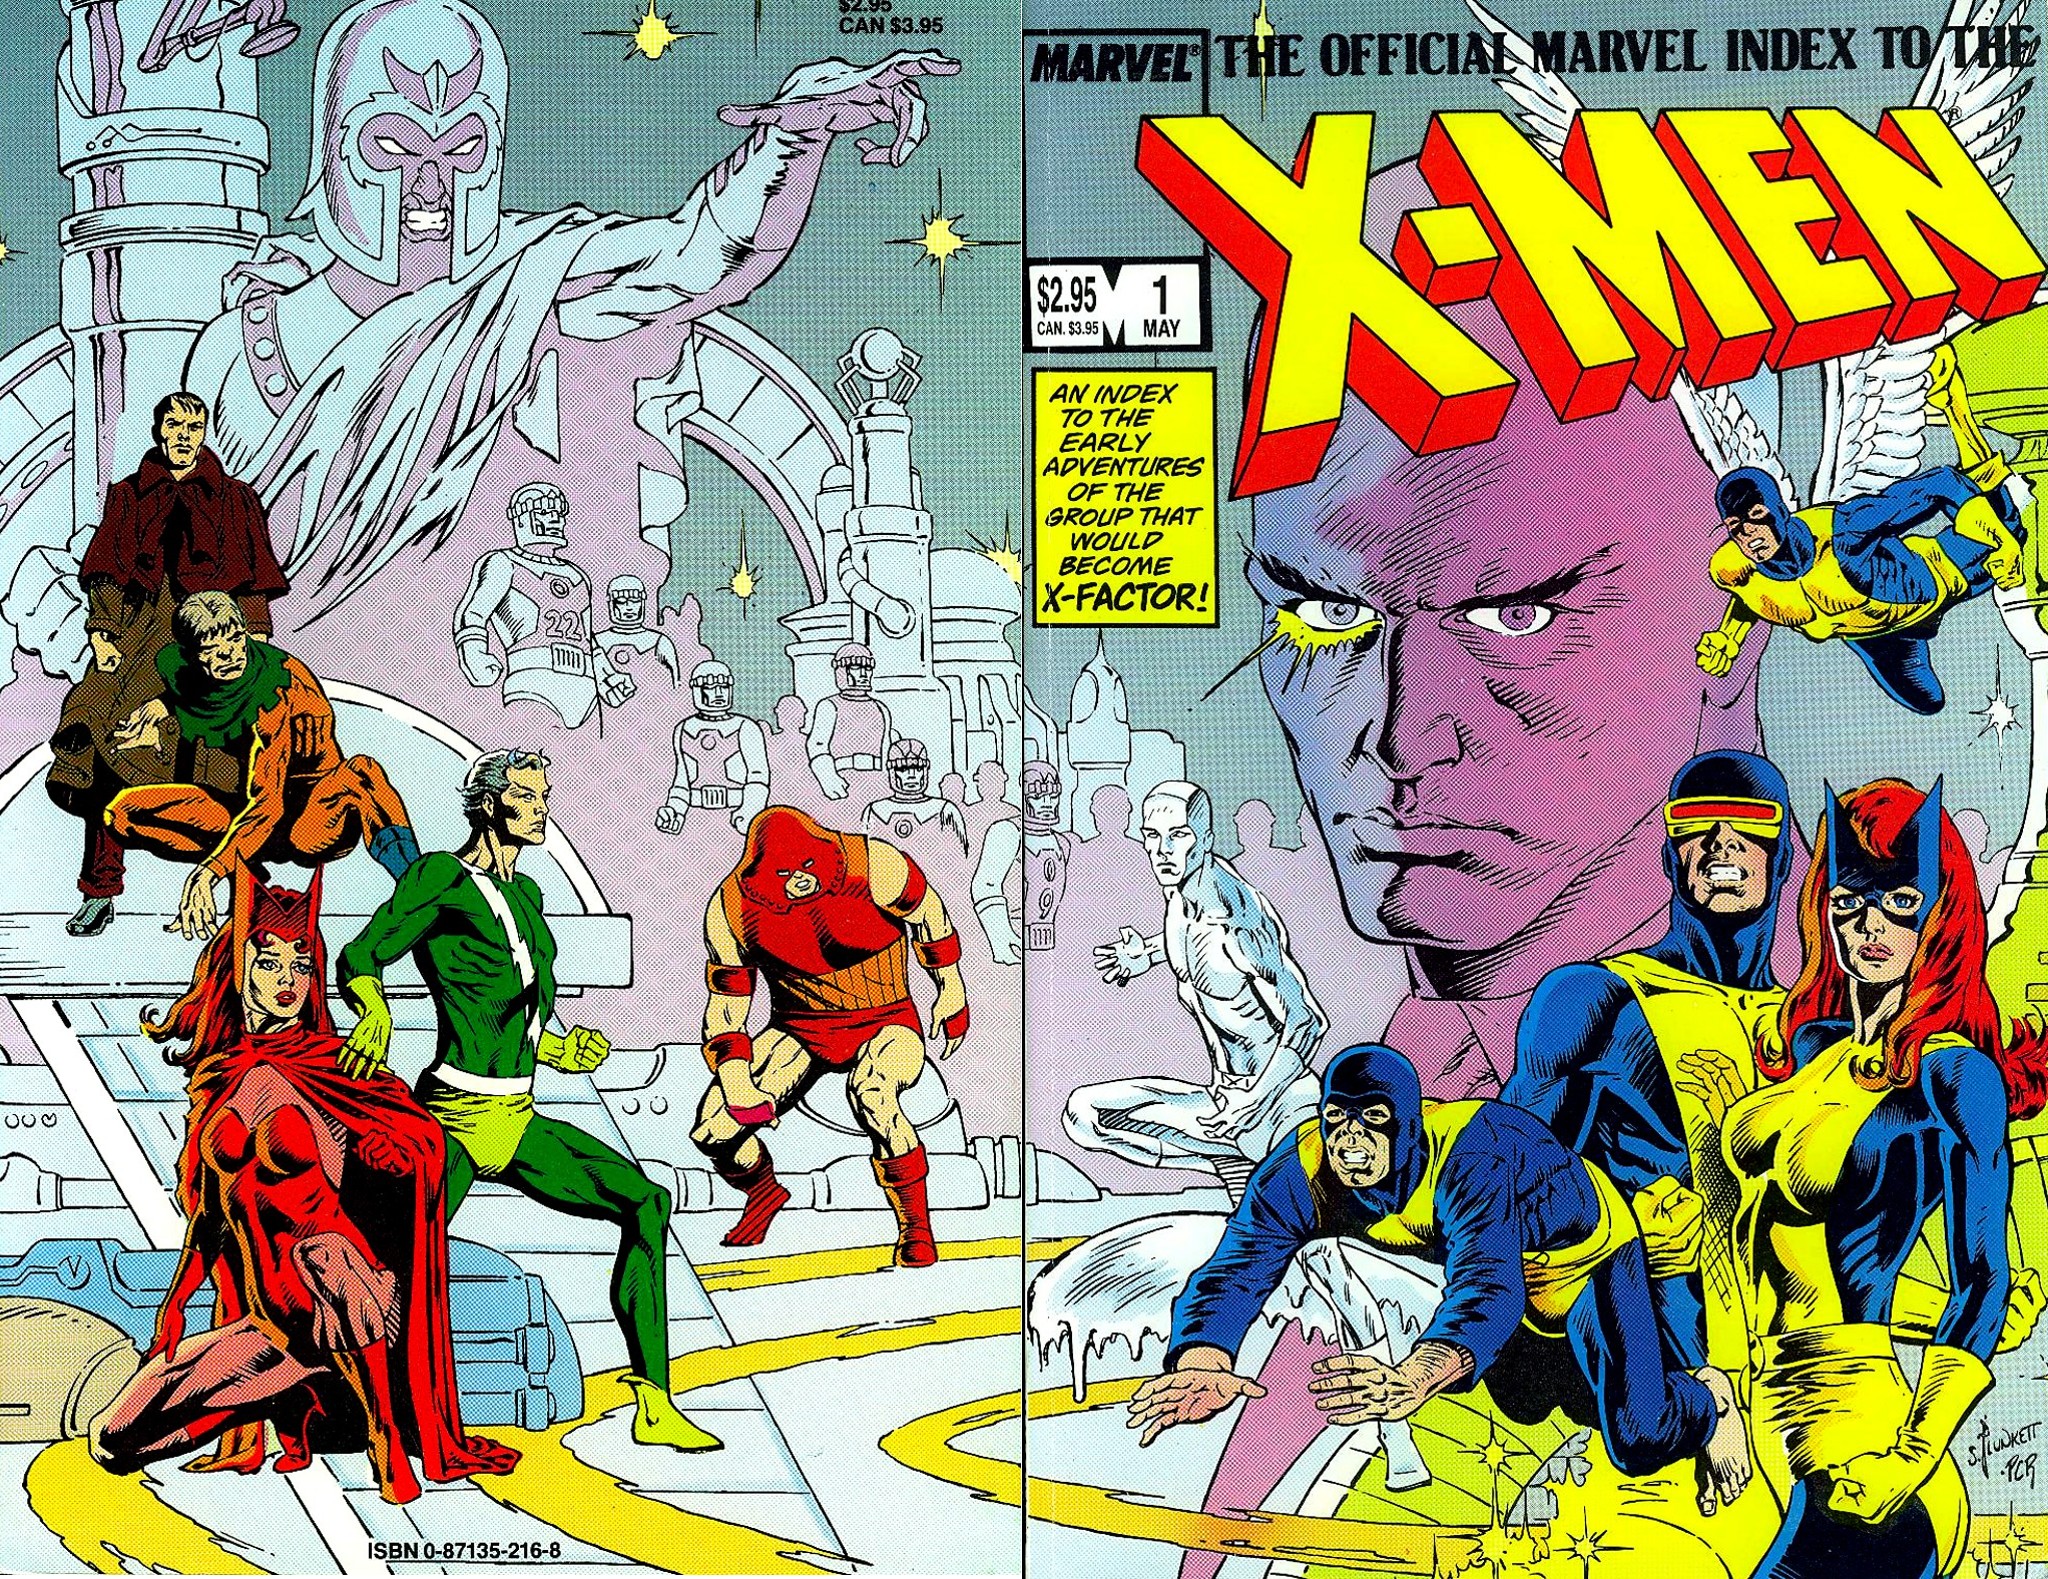 Read online The Official Marvel Index To The X-Men comic -  Issue #1 - 1